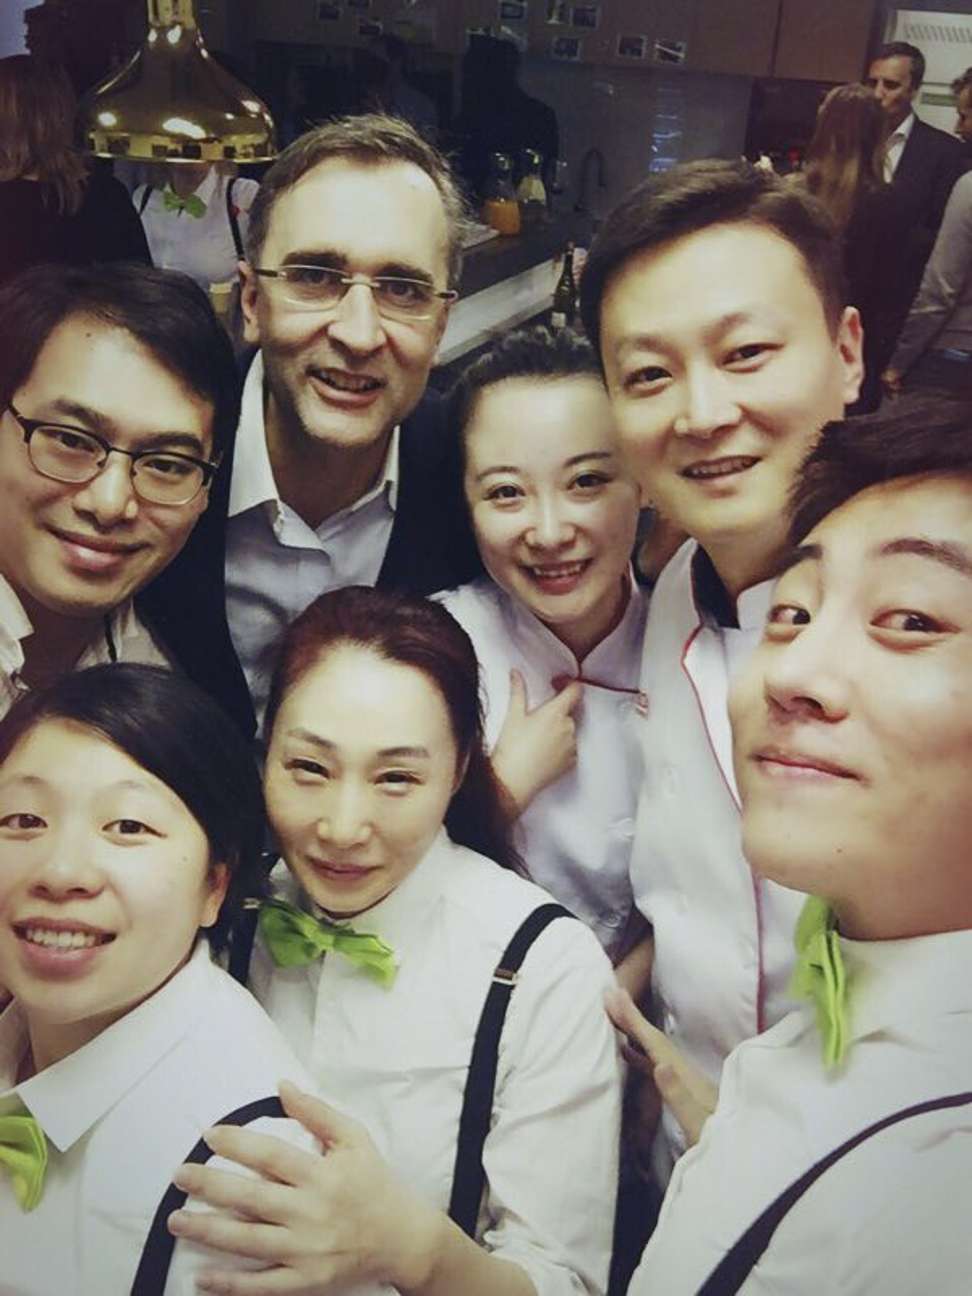 Jerome Laurent, corporate chef for Aden Services, with co-workers in Shanghai.